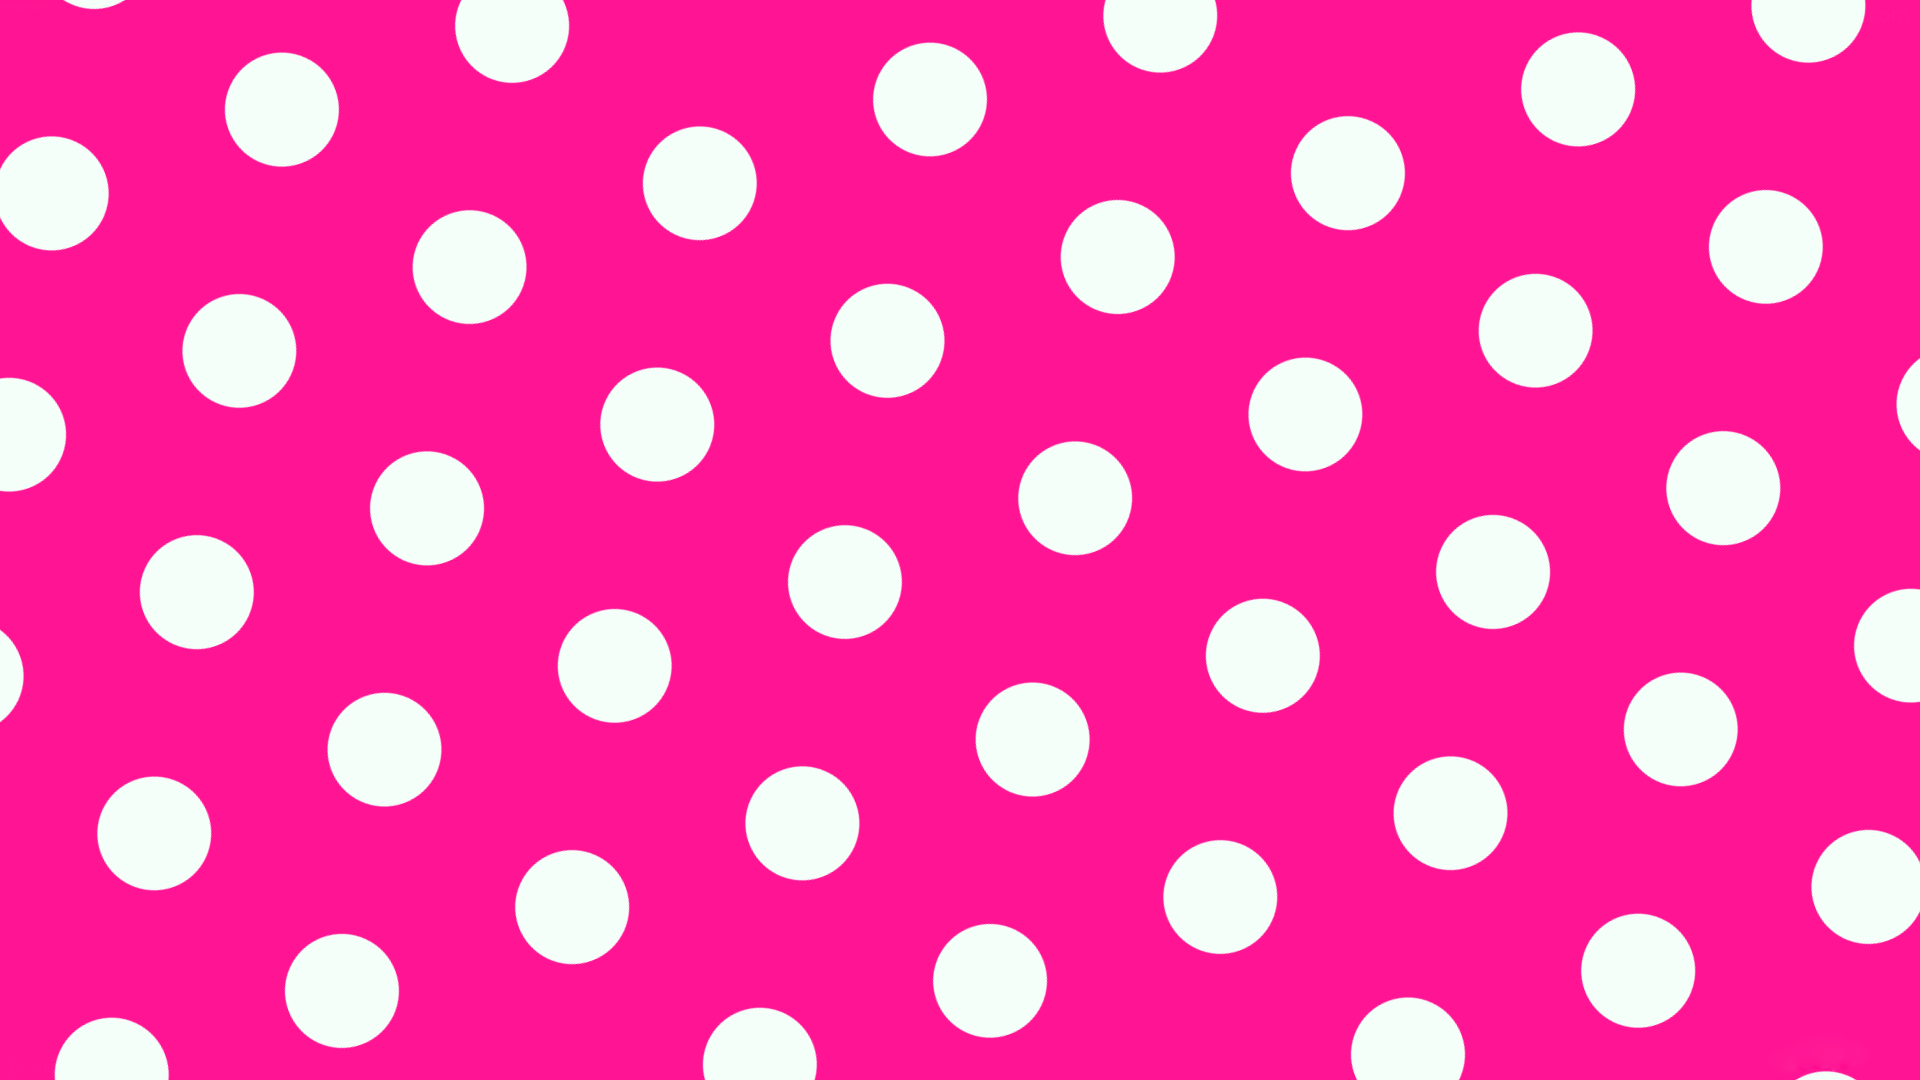 6. Pink and White Polka Dot Nails - wide 3